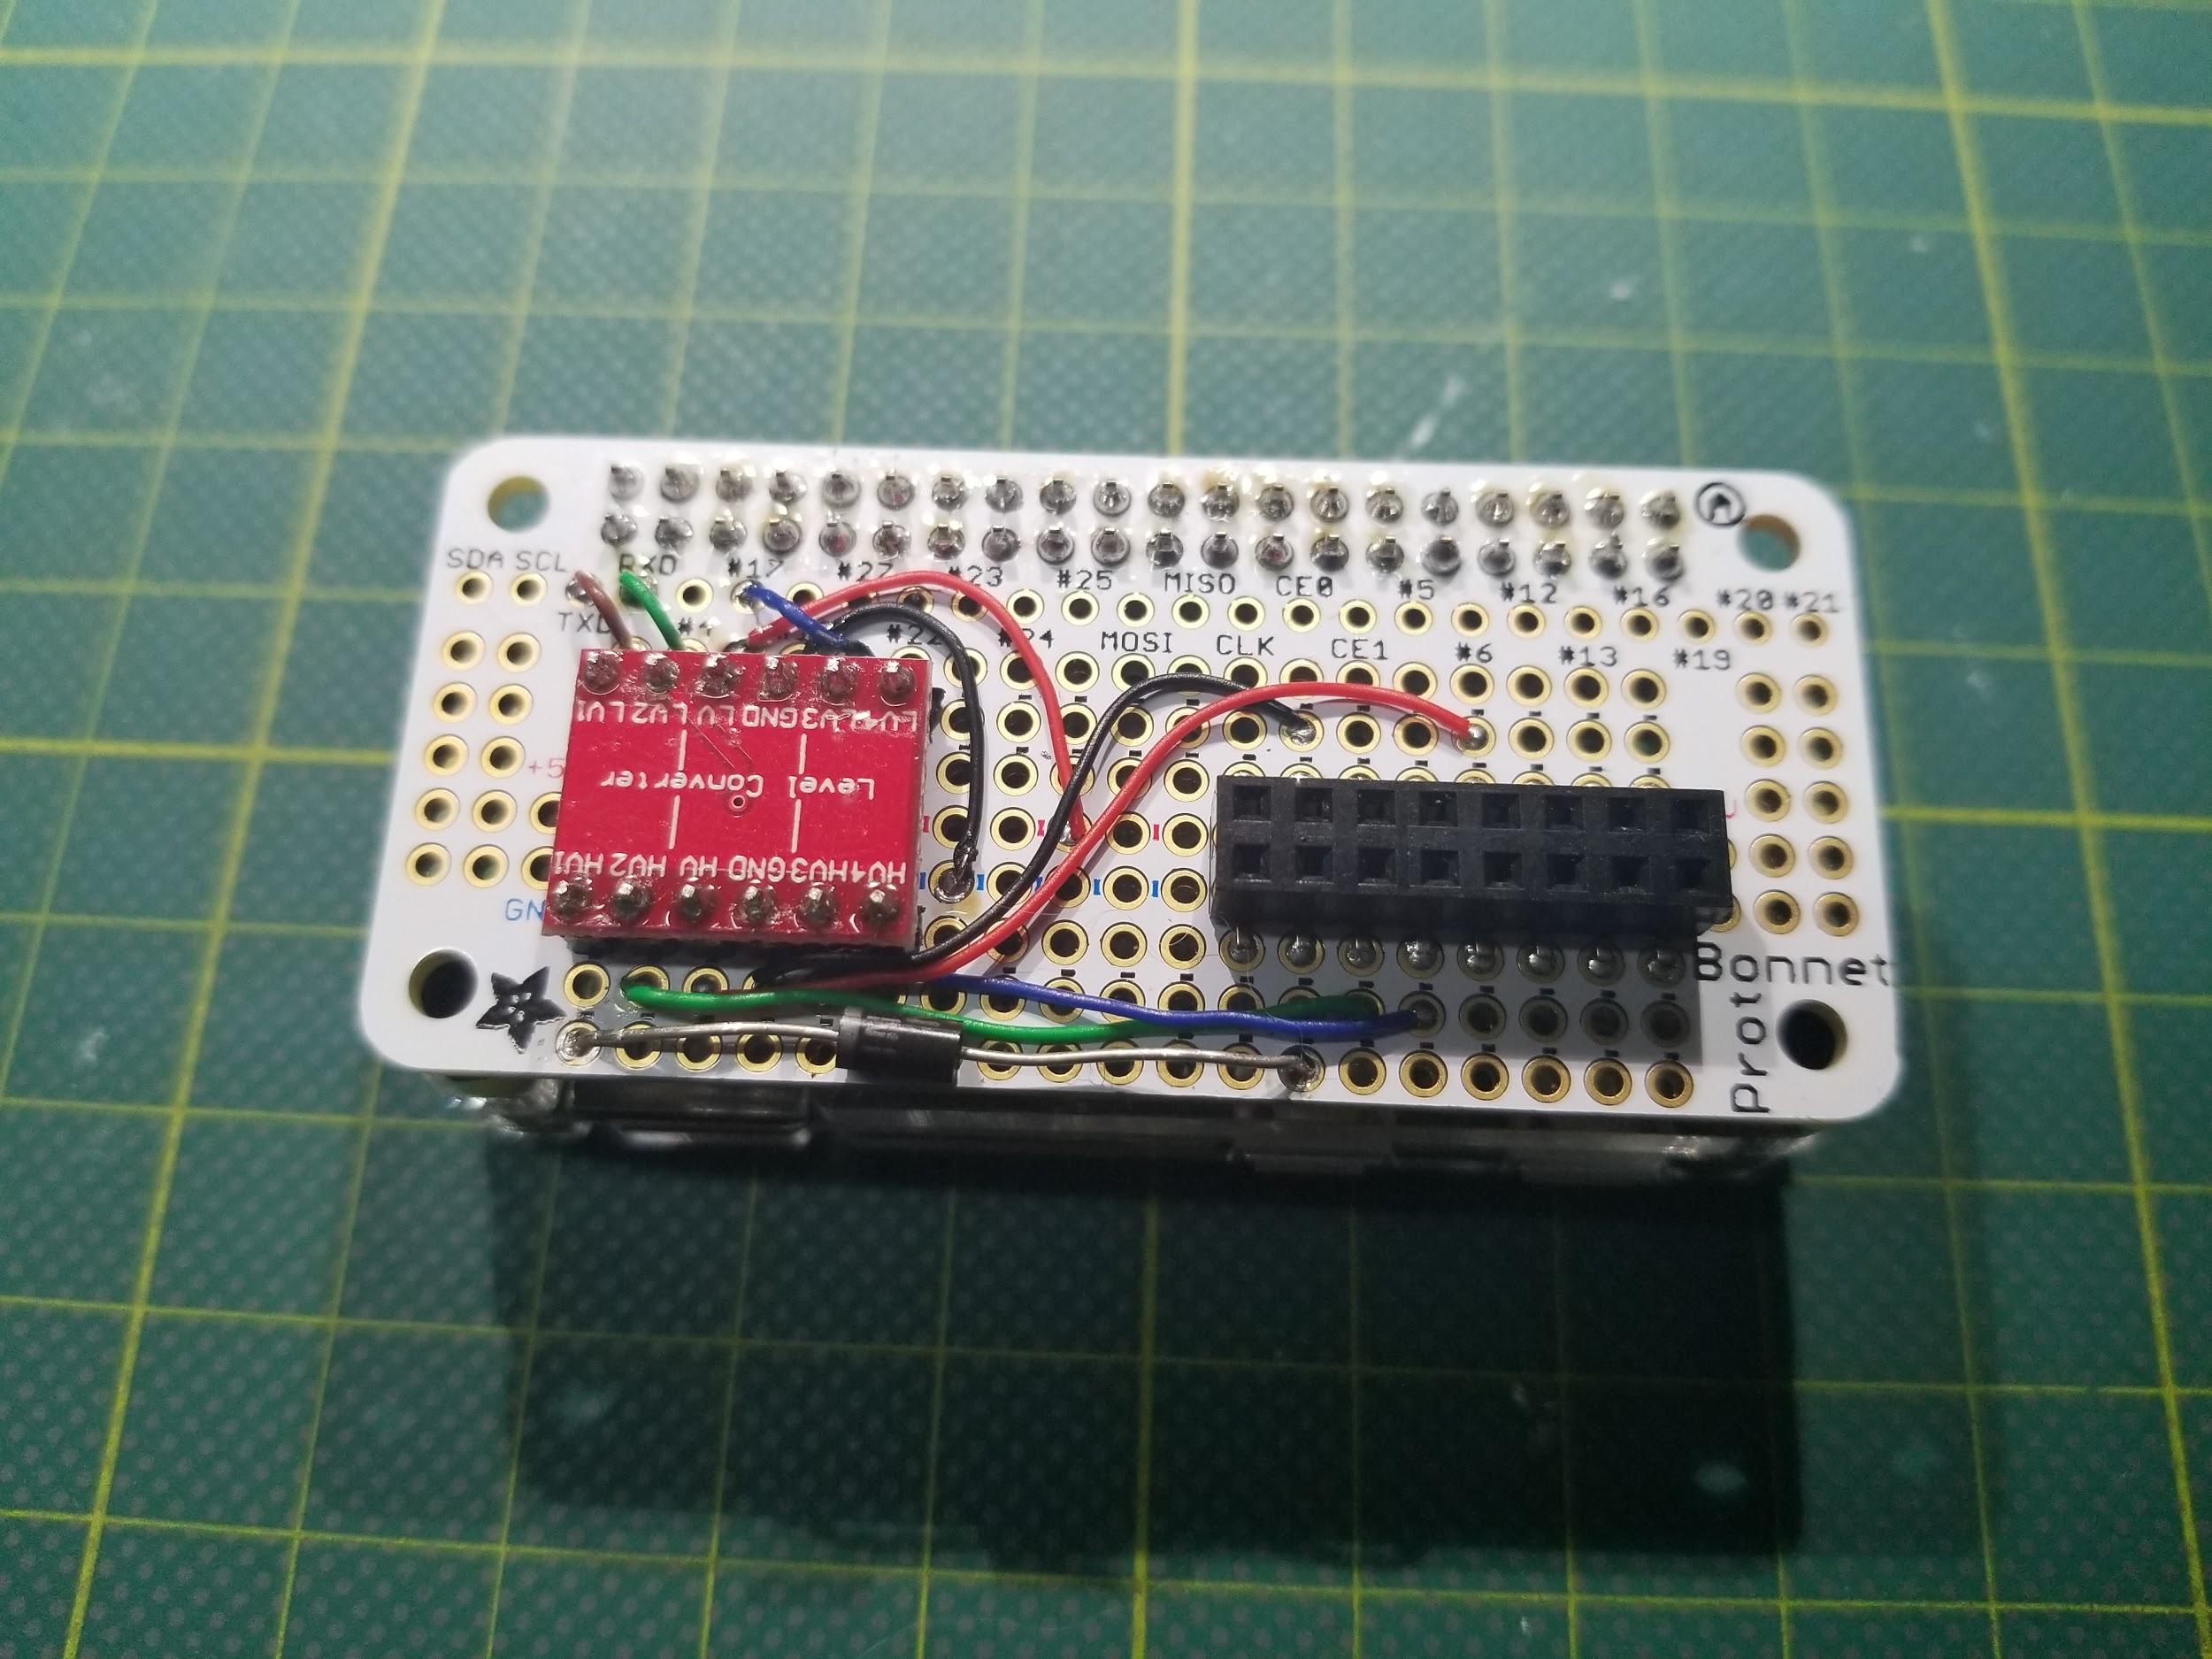 Next prototype of SIO2Pi soldered together on a Perma Proto Bonnet